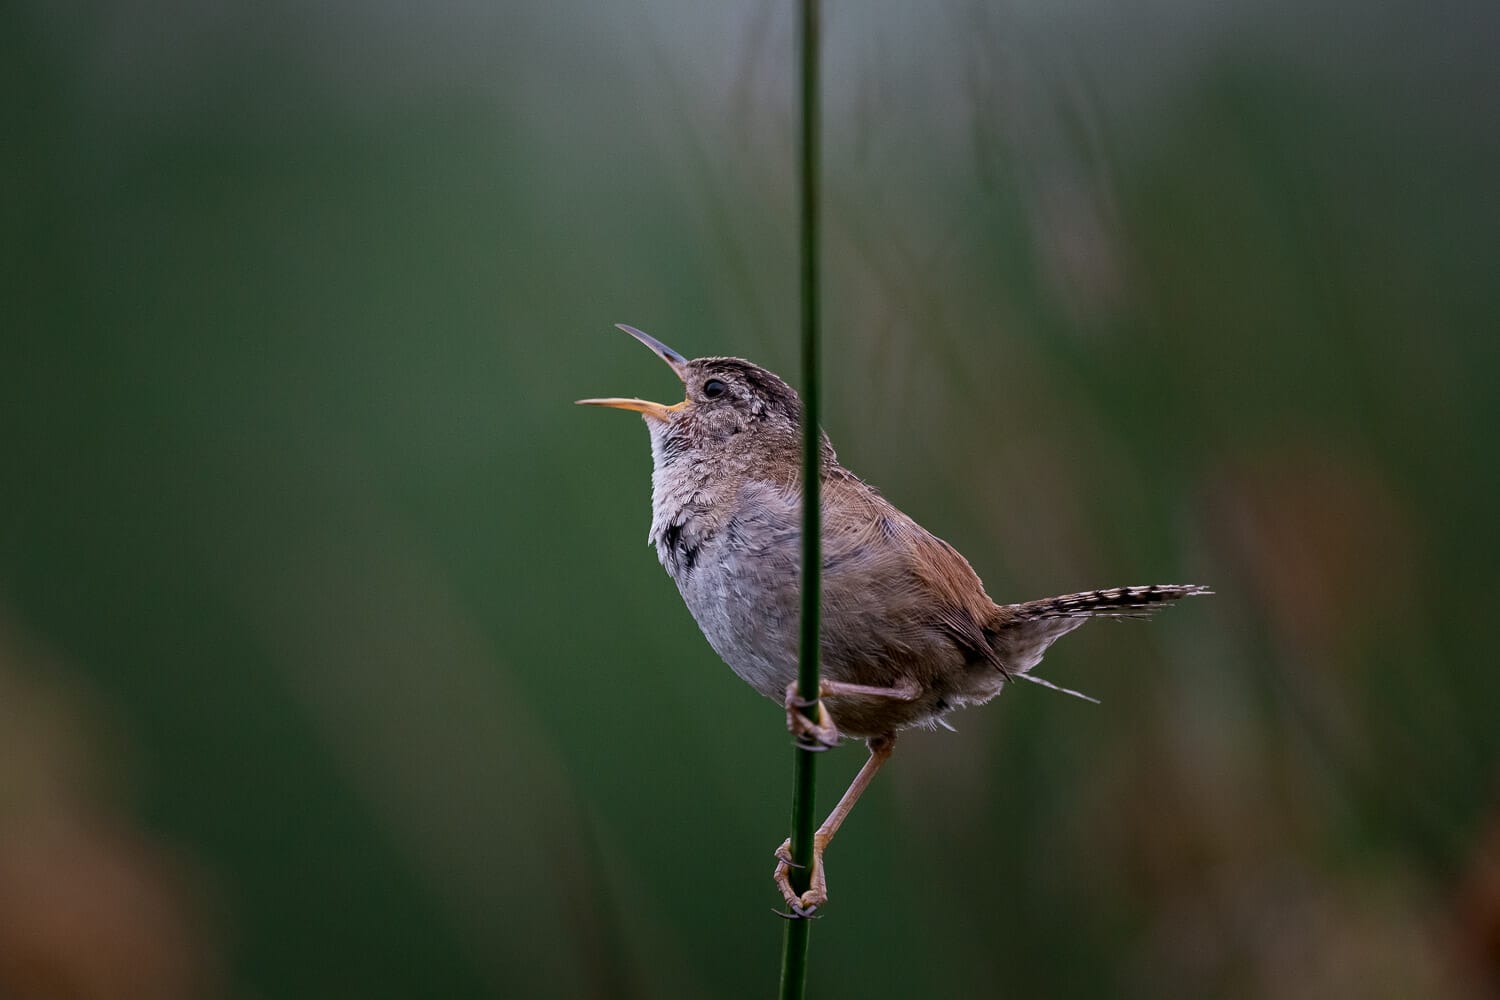 A small brown bird perched on a vertical stem singing or calling out.